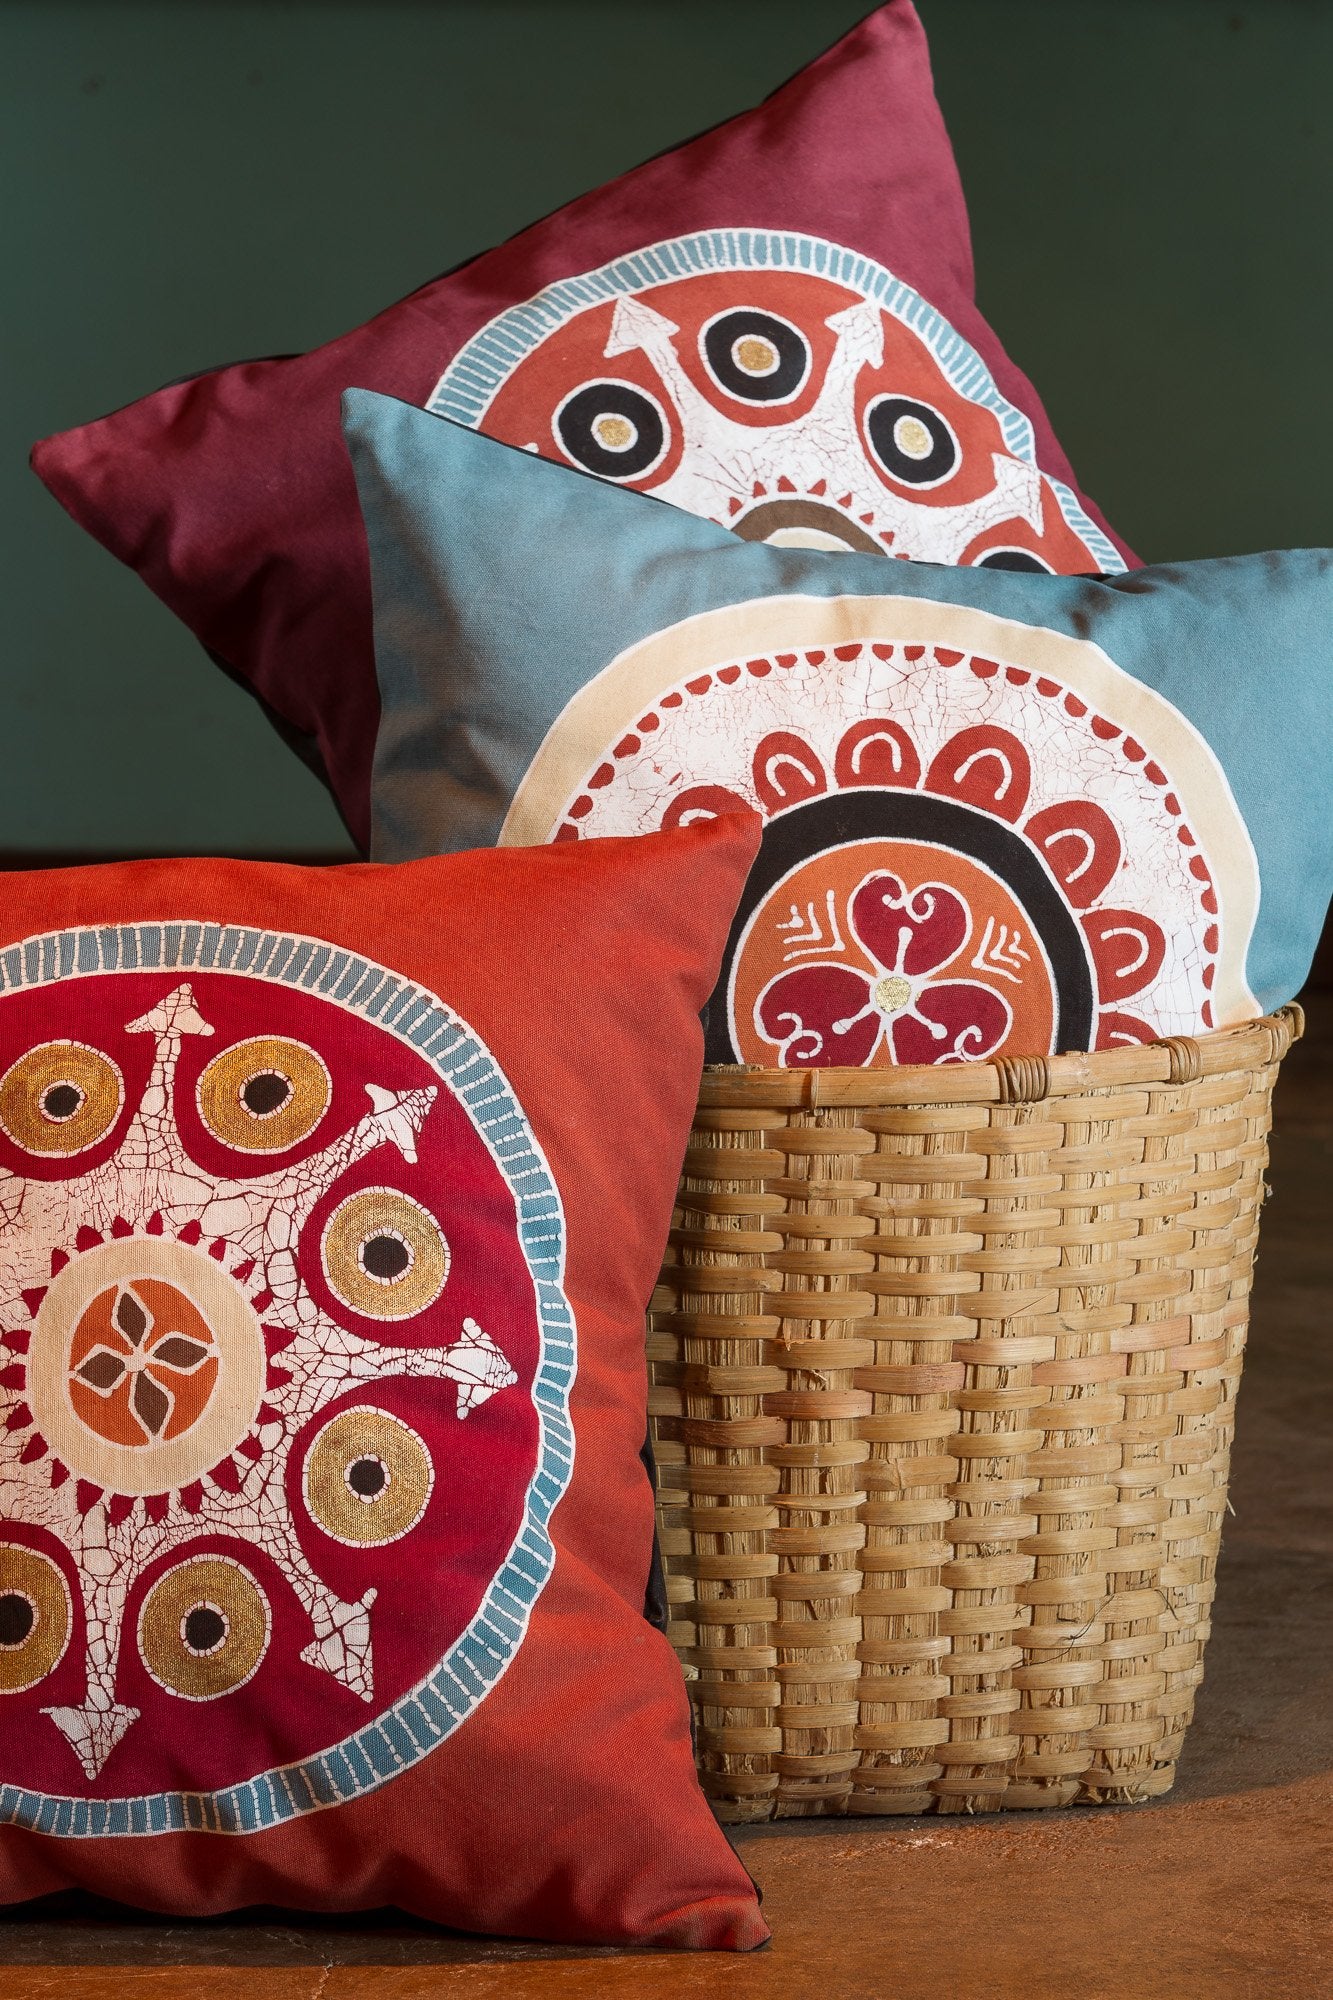 Cushion cover decorated with traditional African circle motif design